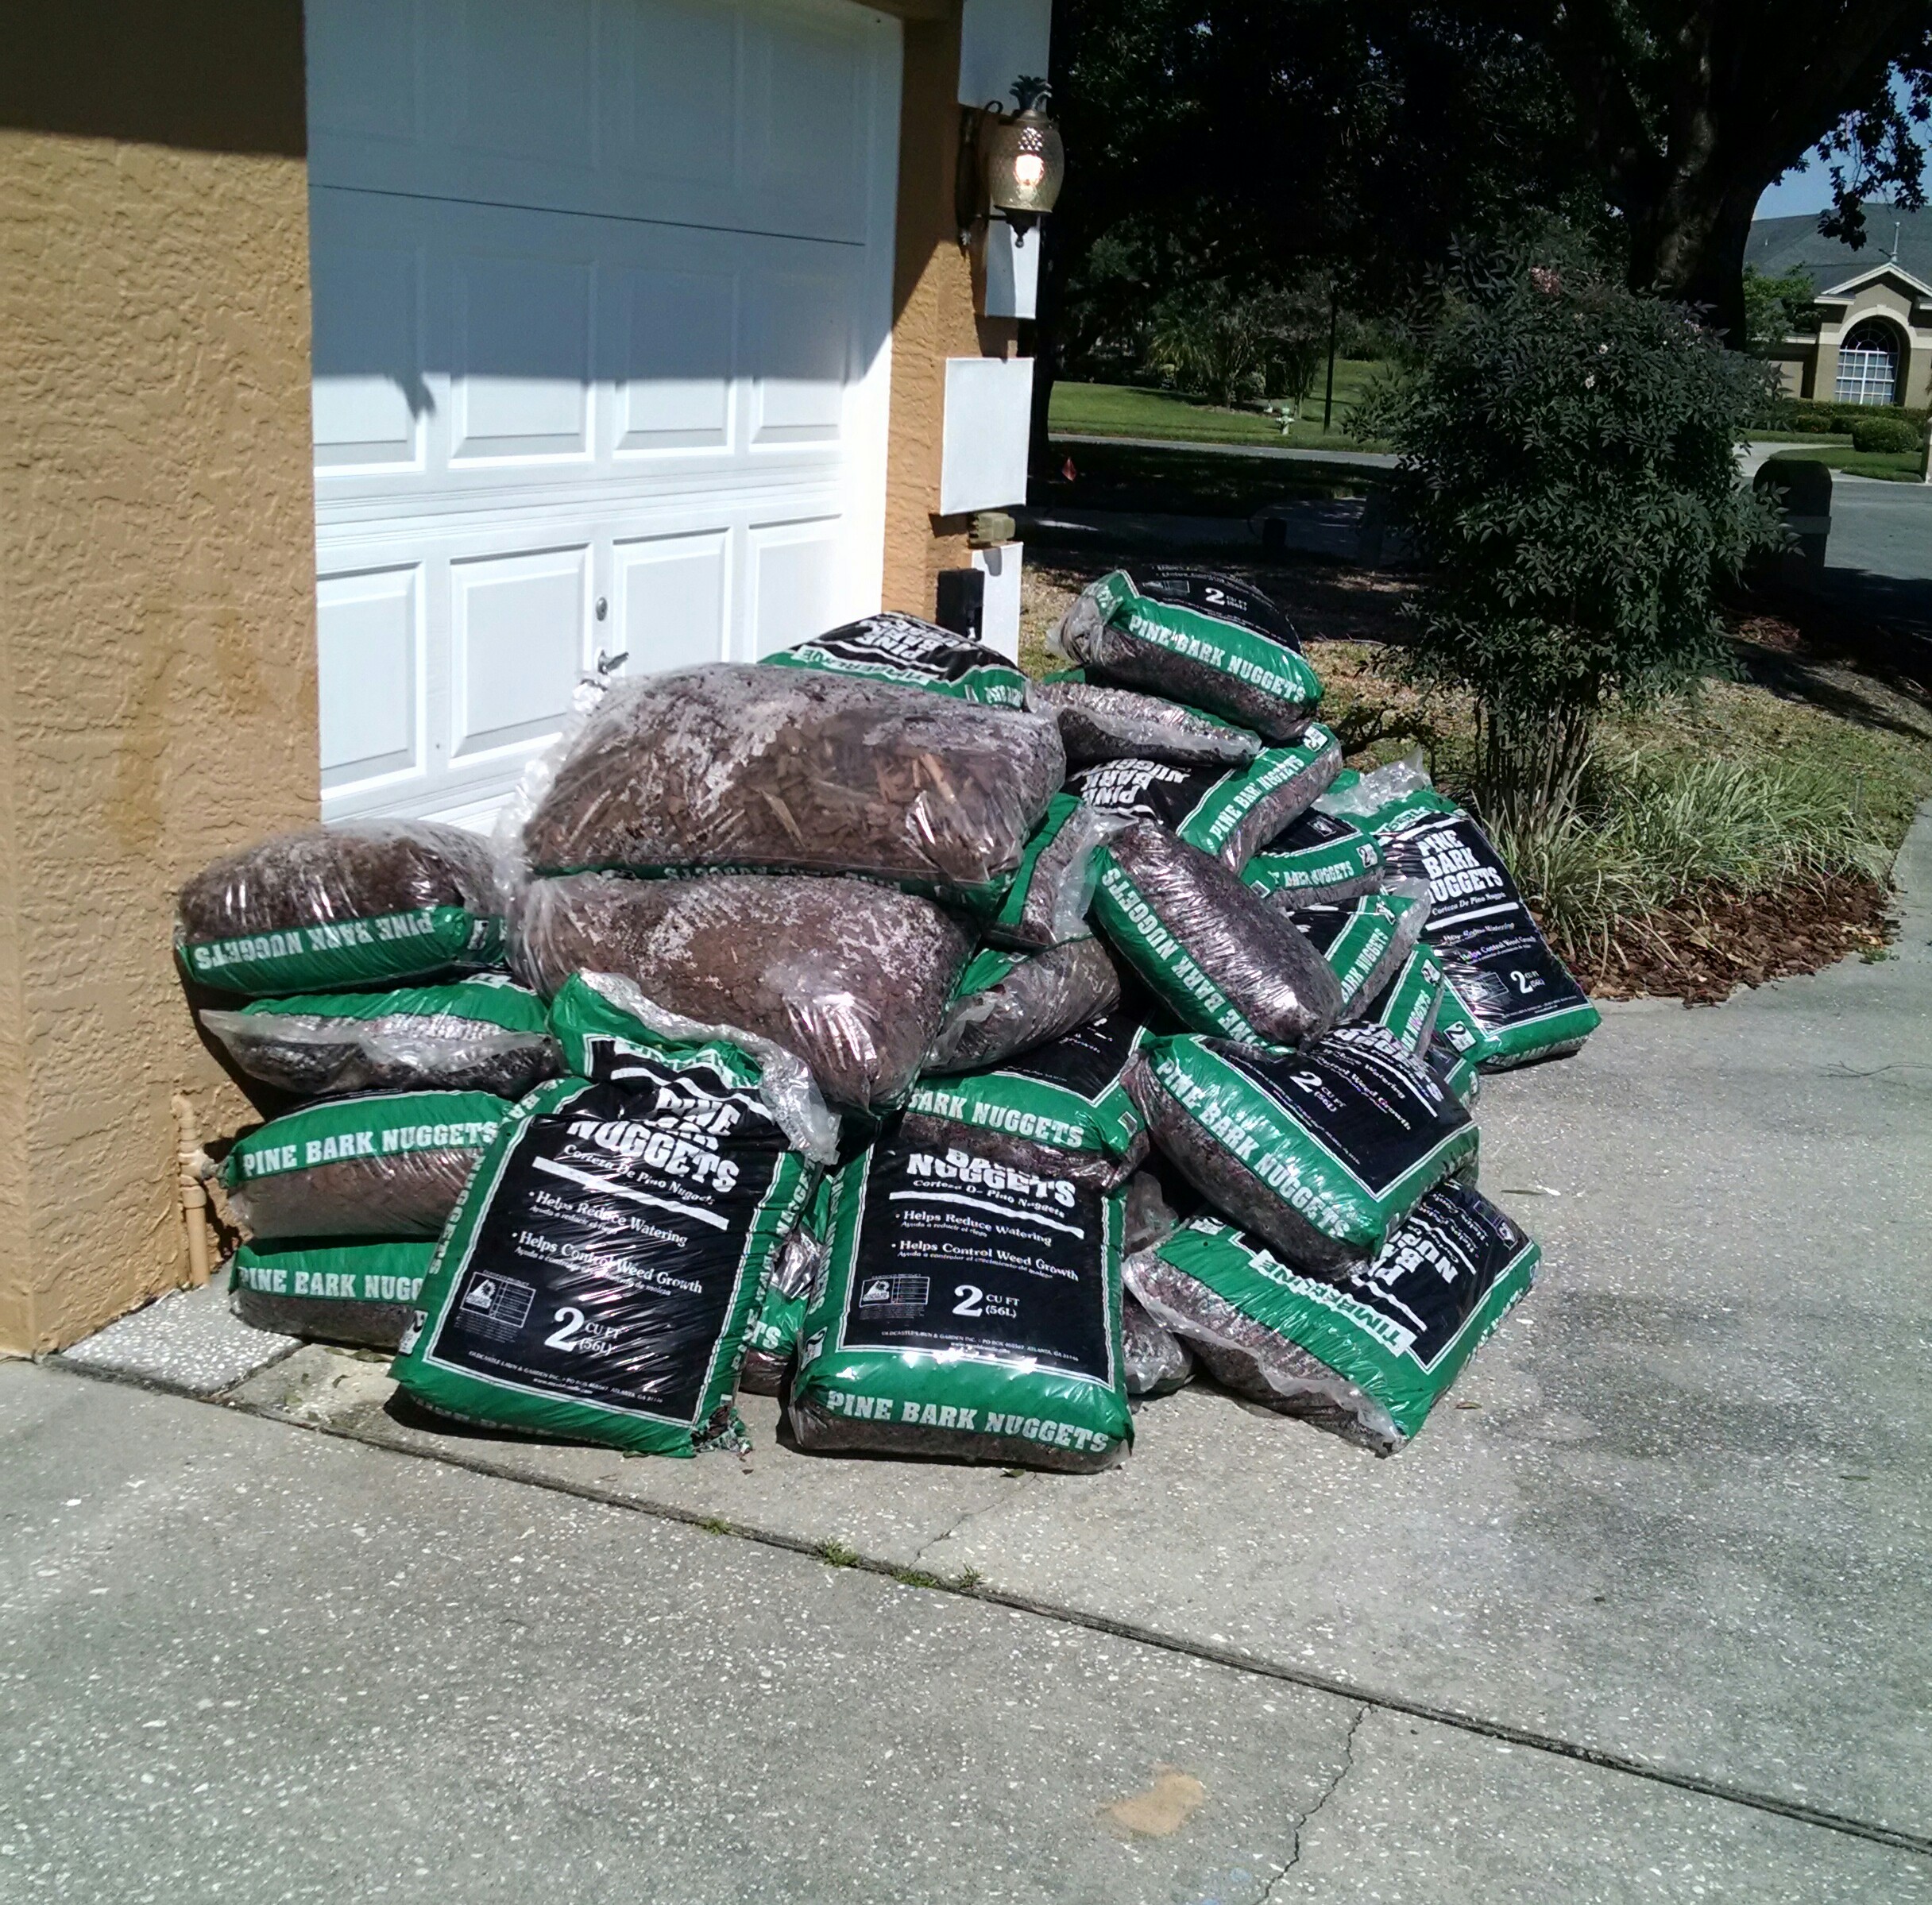 50 bags of mulch in front of my garage door.  It's still there as I'm disabled and not able to move it.